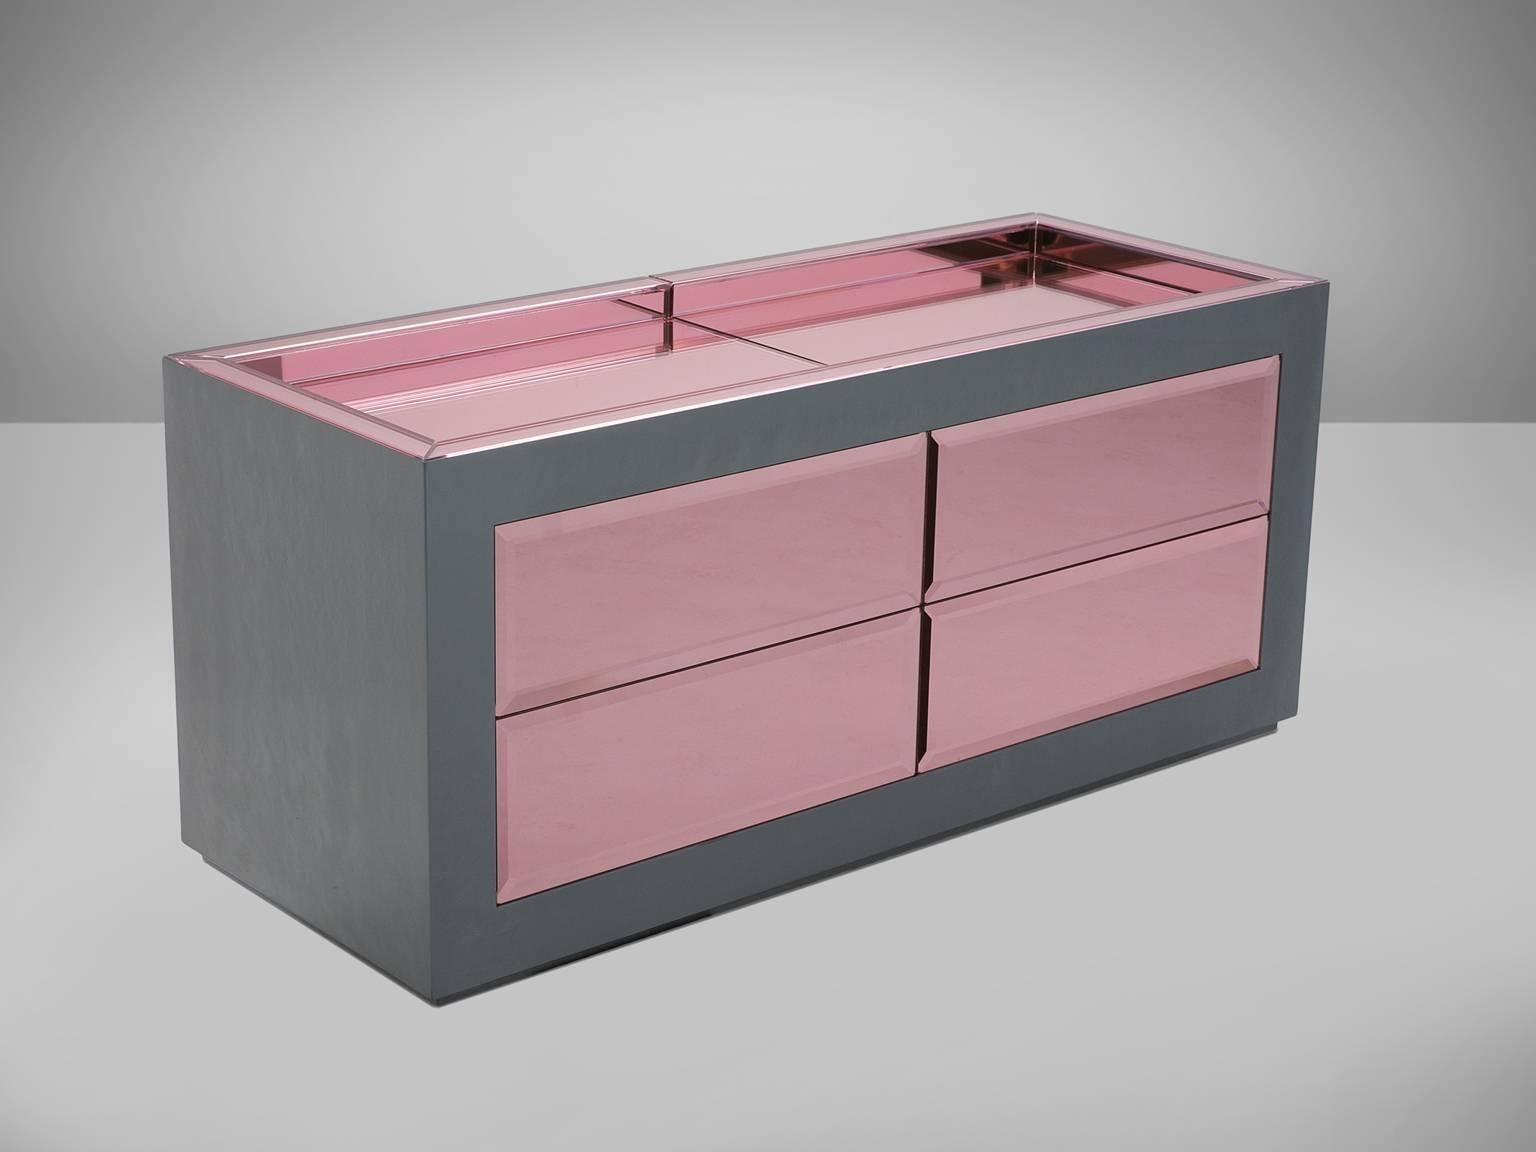 Christian Lacroix, pair of sideboards, pink and grey glass, Europe, 1970s.

Covered with pink and transparent silver colored glass, this decorative shop counter is a true eye-catcher. Equipped with four drawers with 'push' mechanism to provide an